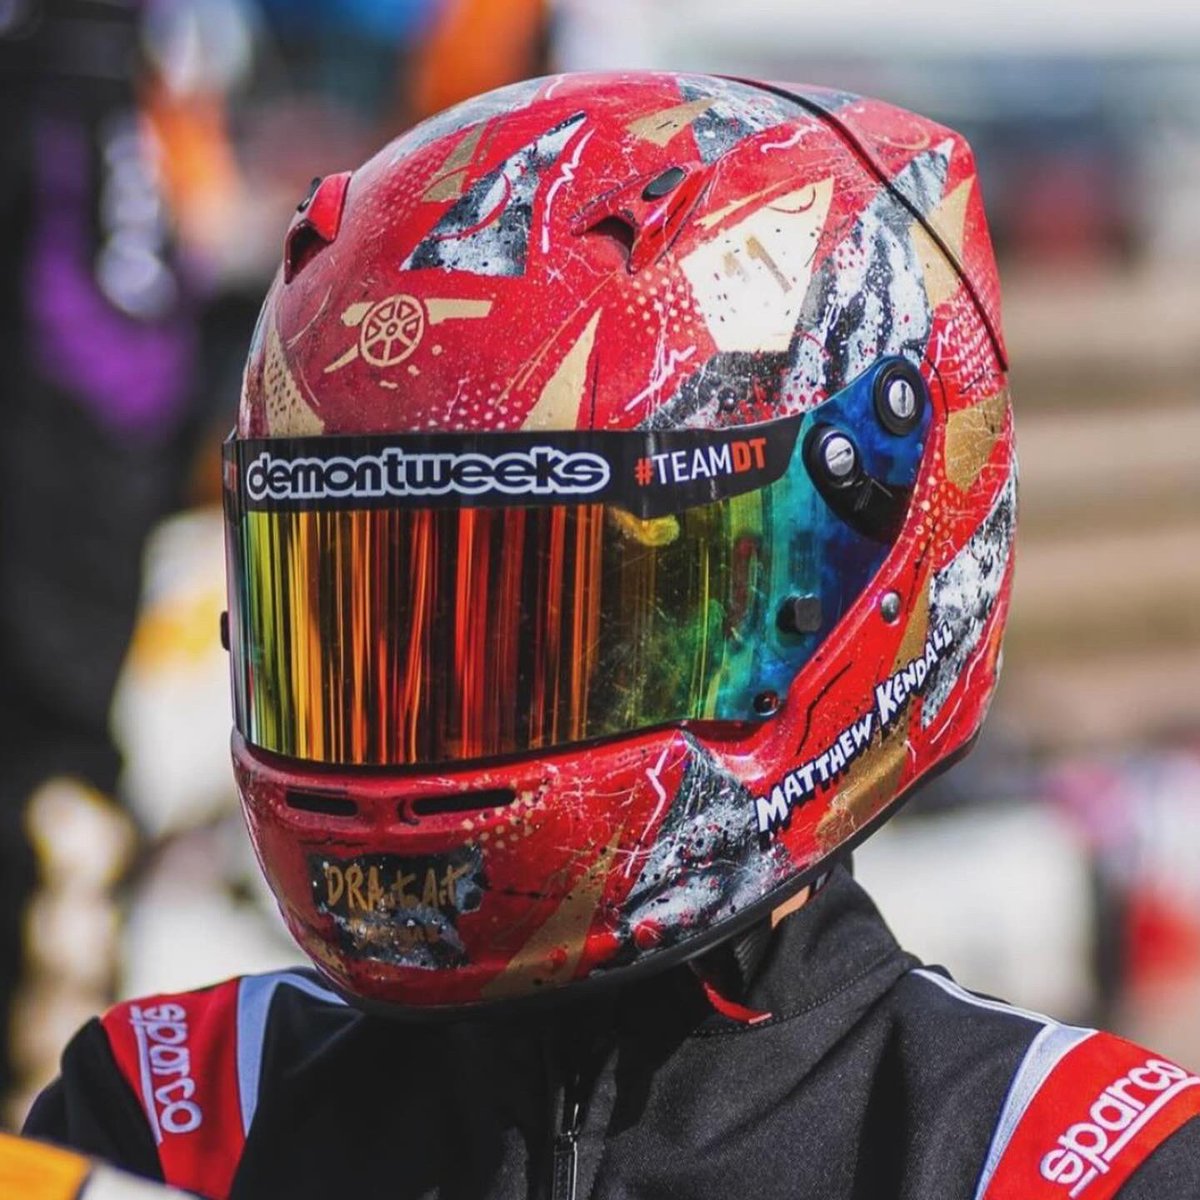 My latest helmet design had its first outing at the weekend. Looking good  🙌🏻
If you’d like your own graffiti karting helmet, please get in touch! #drautoartdesigns
.
.
#helmetdesign #helmetpaint #helmetdesigns #helmetpainting #graffitihelmet #karting #arai #araihelmet